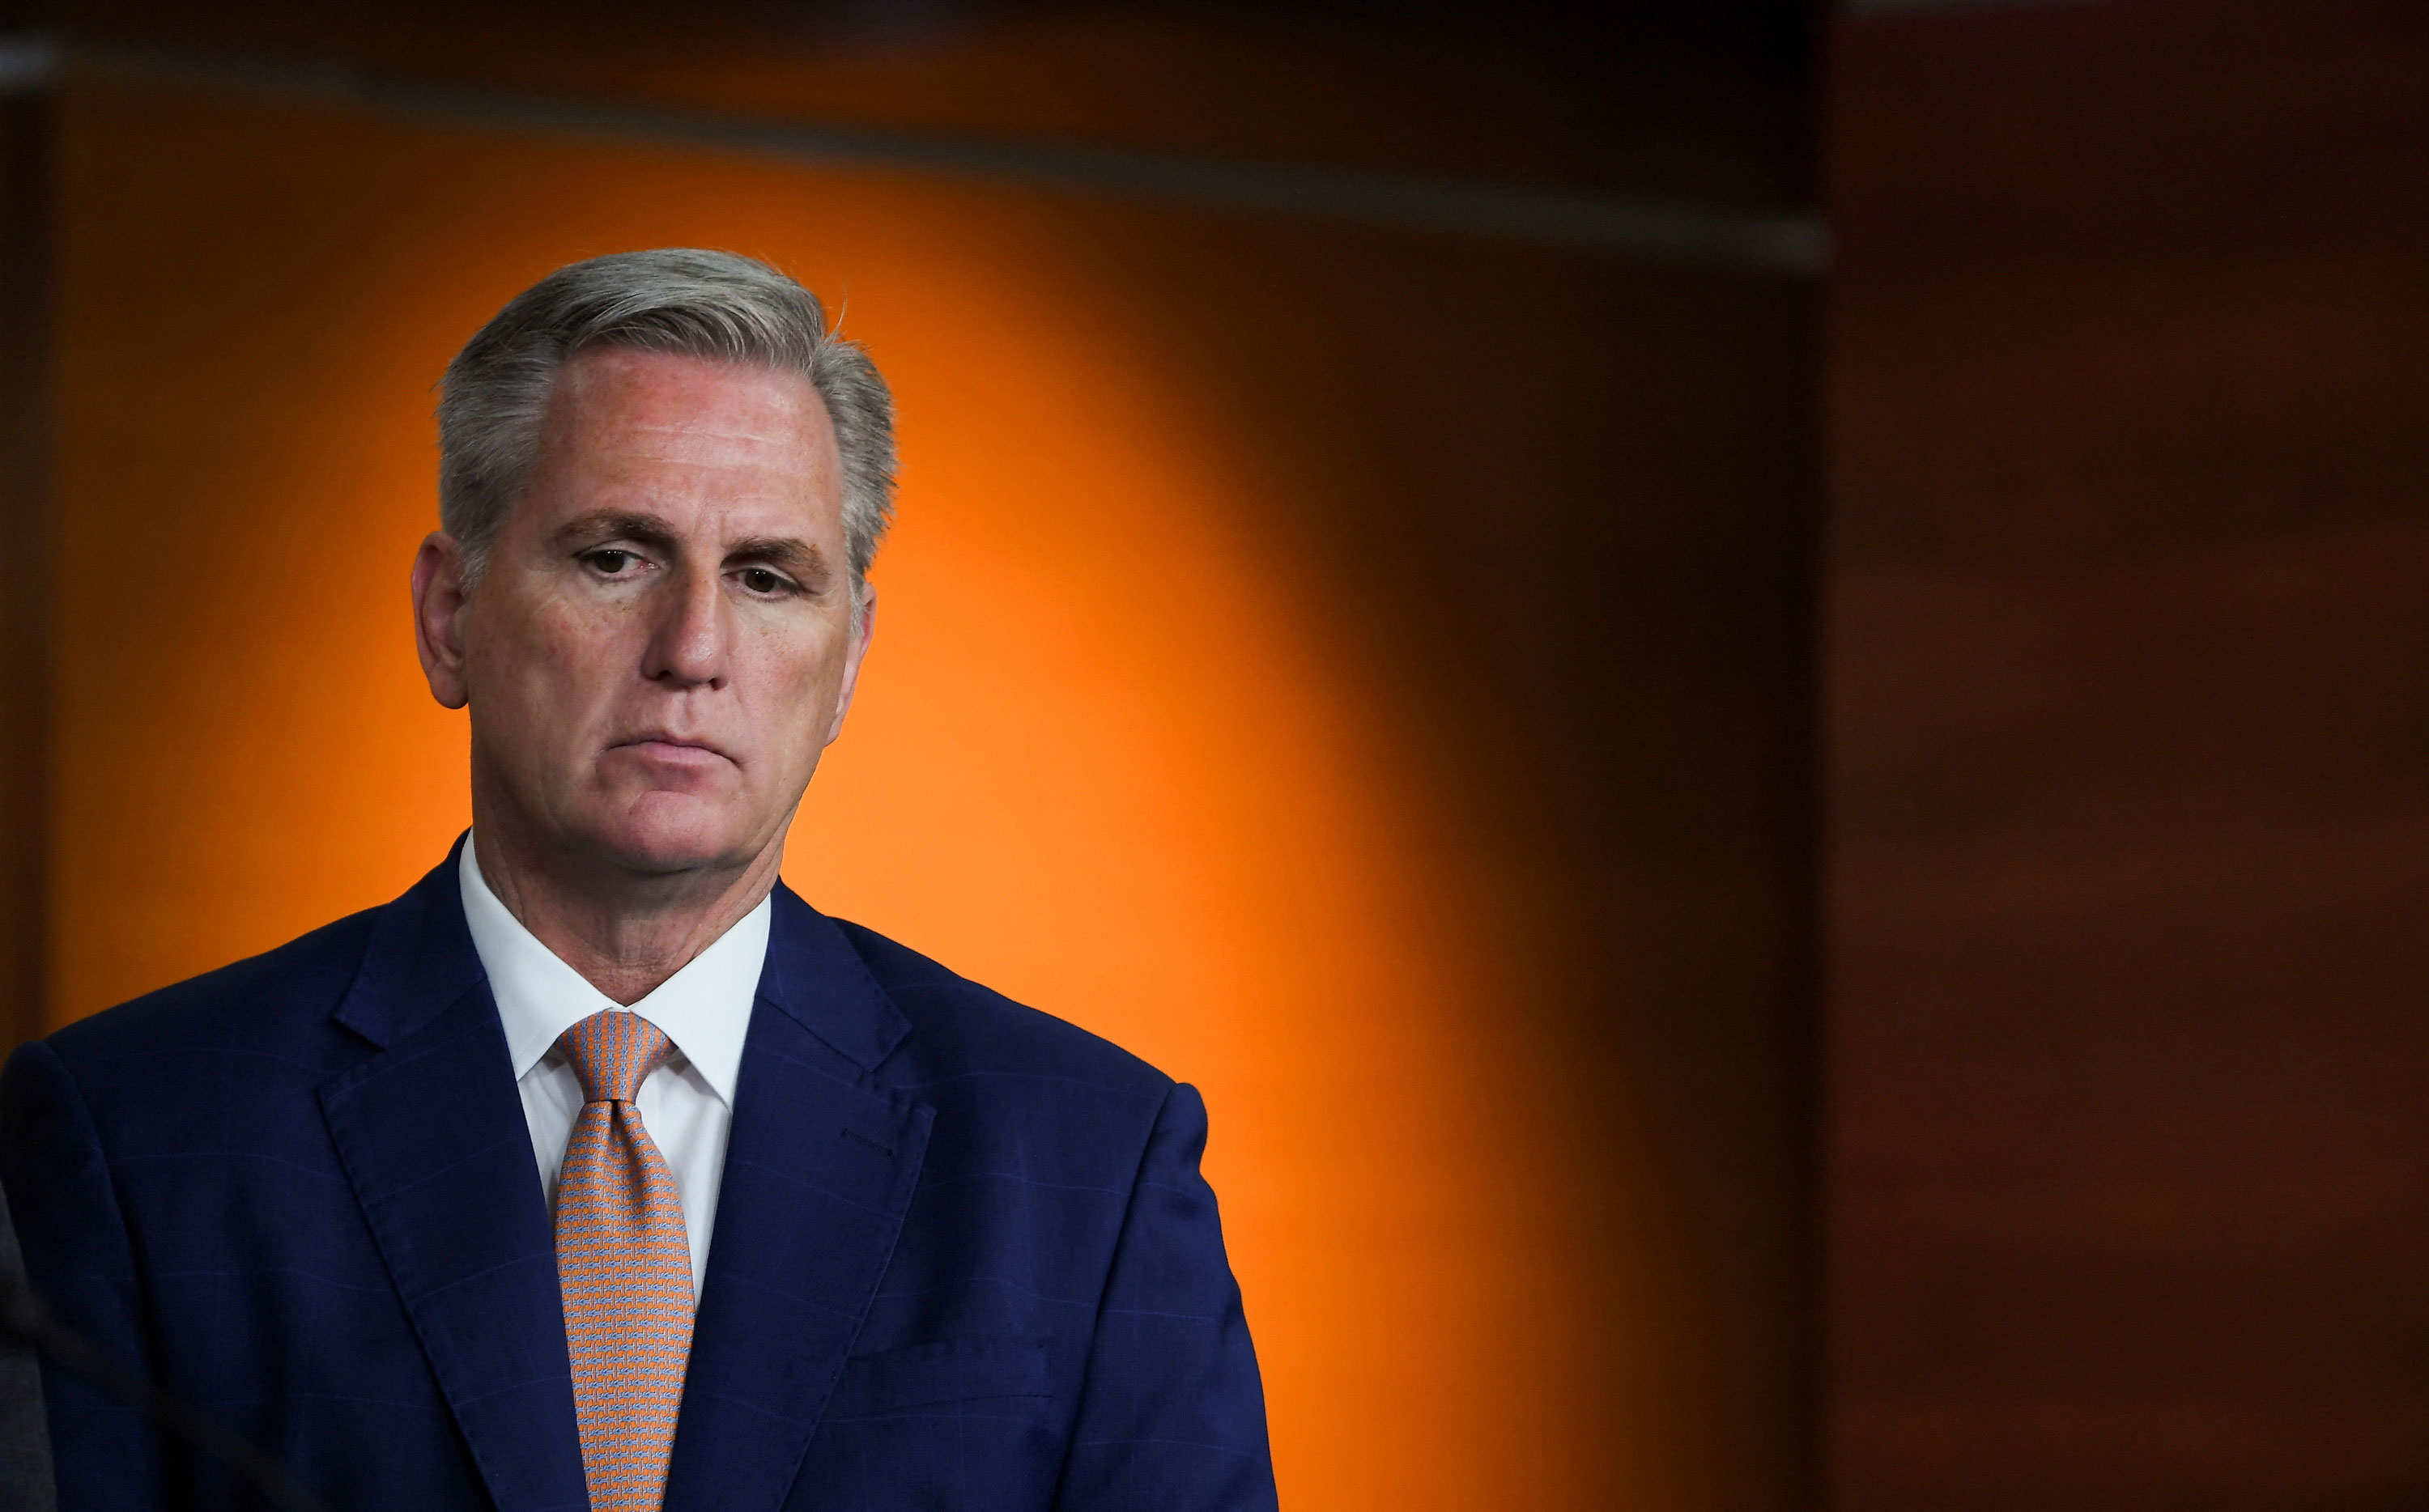 House Minority Leader Rep. Kevin McCarthy is seen during a press conferenc June 23, 2022. REUTERS/Mary F. Calvert